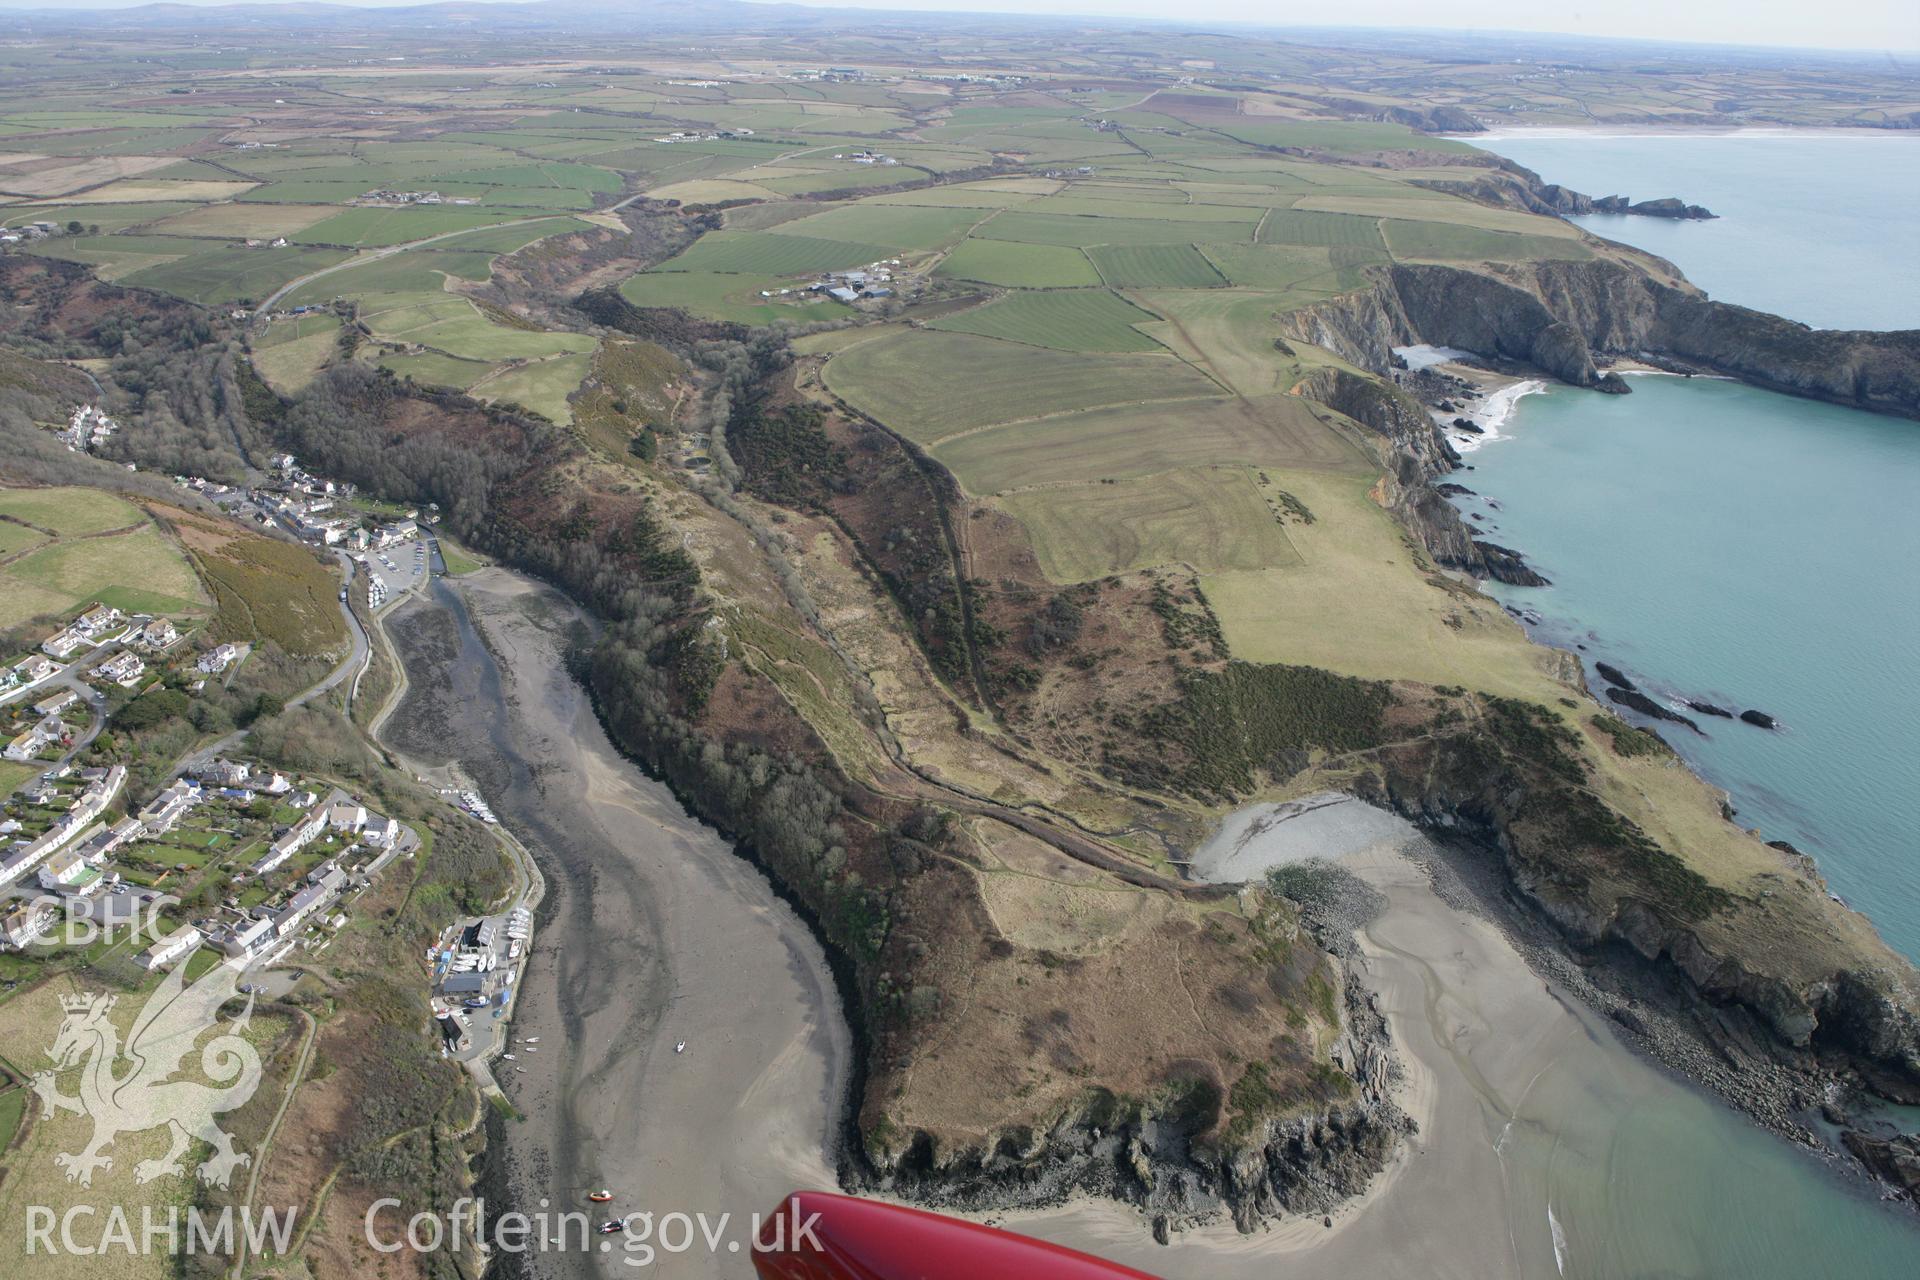 RCAHMW colour oblique aerial photograph of a promontory fort south of Solva Harbour. Taken on 02 March 2010 by Toby Driver